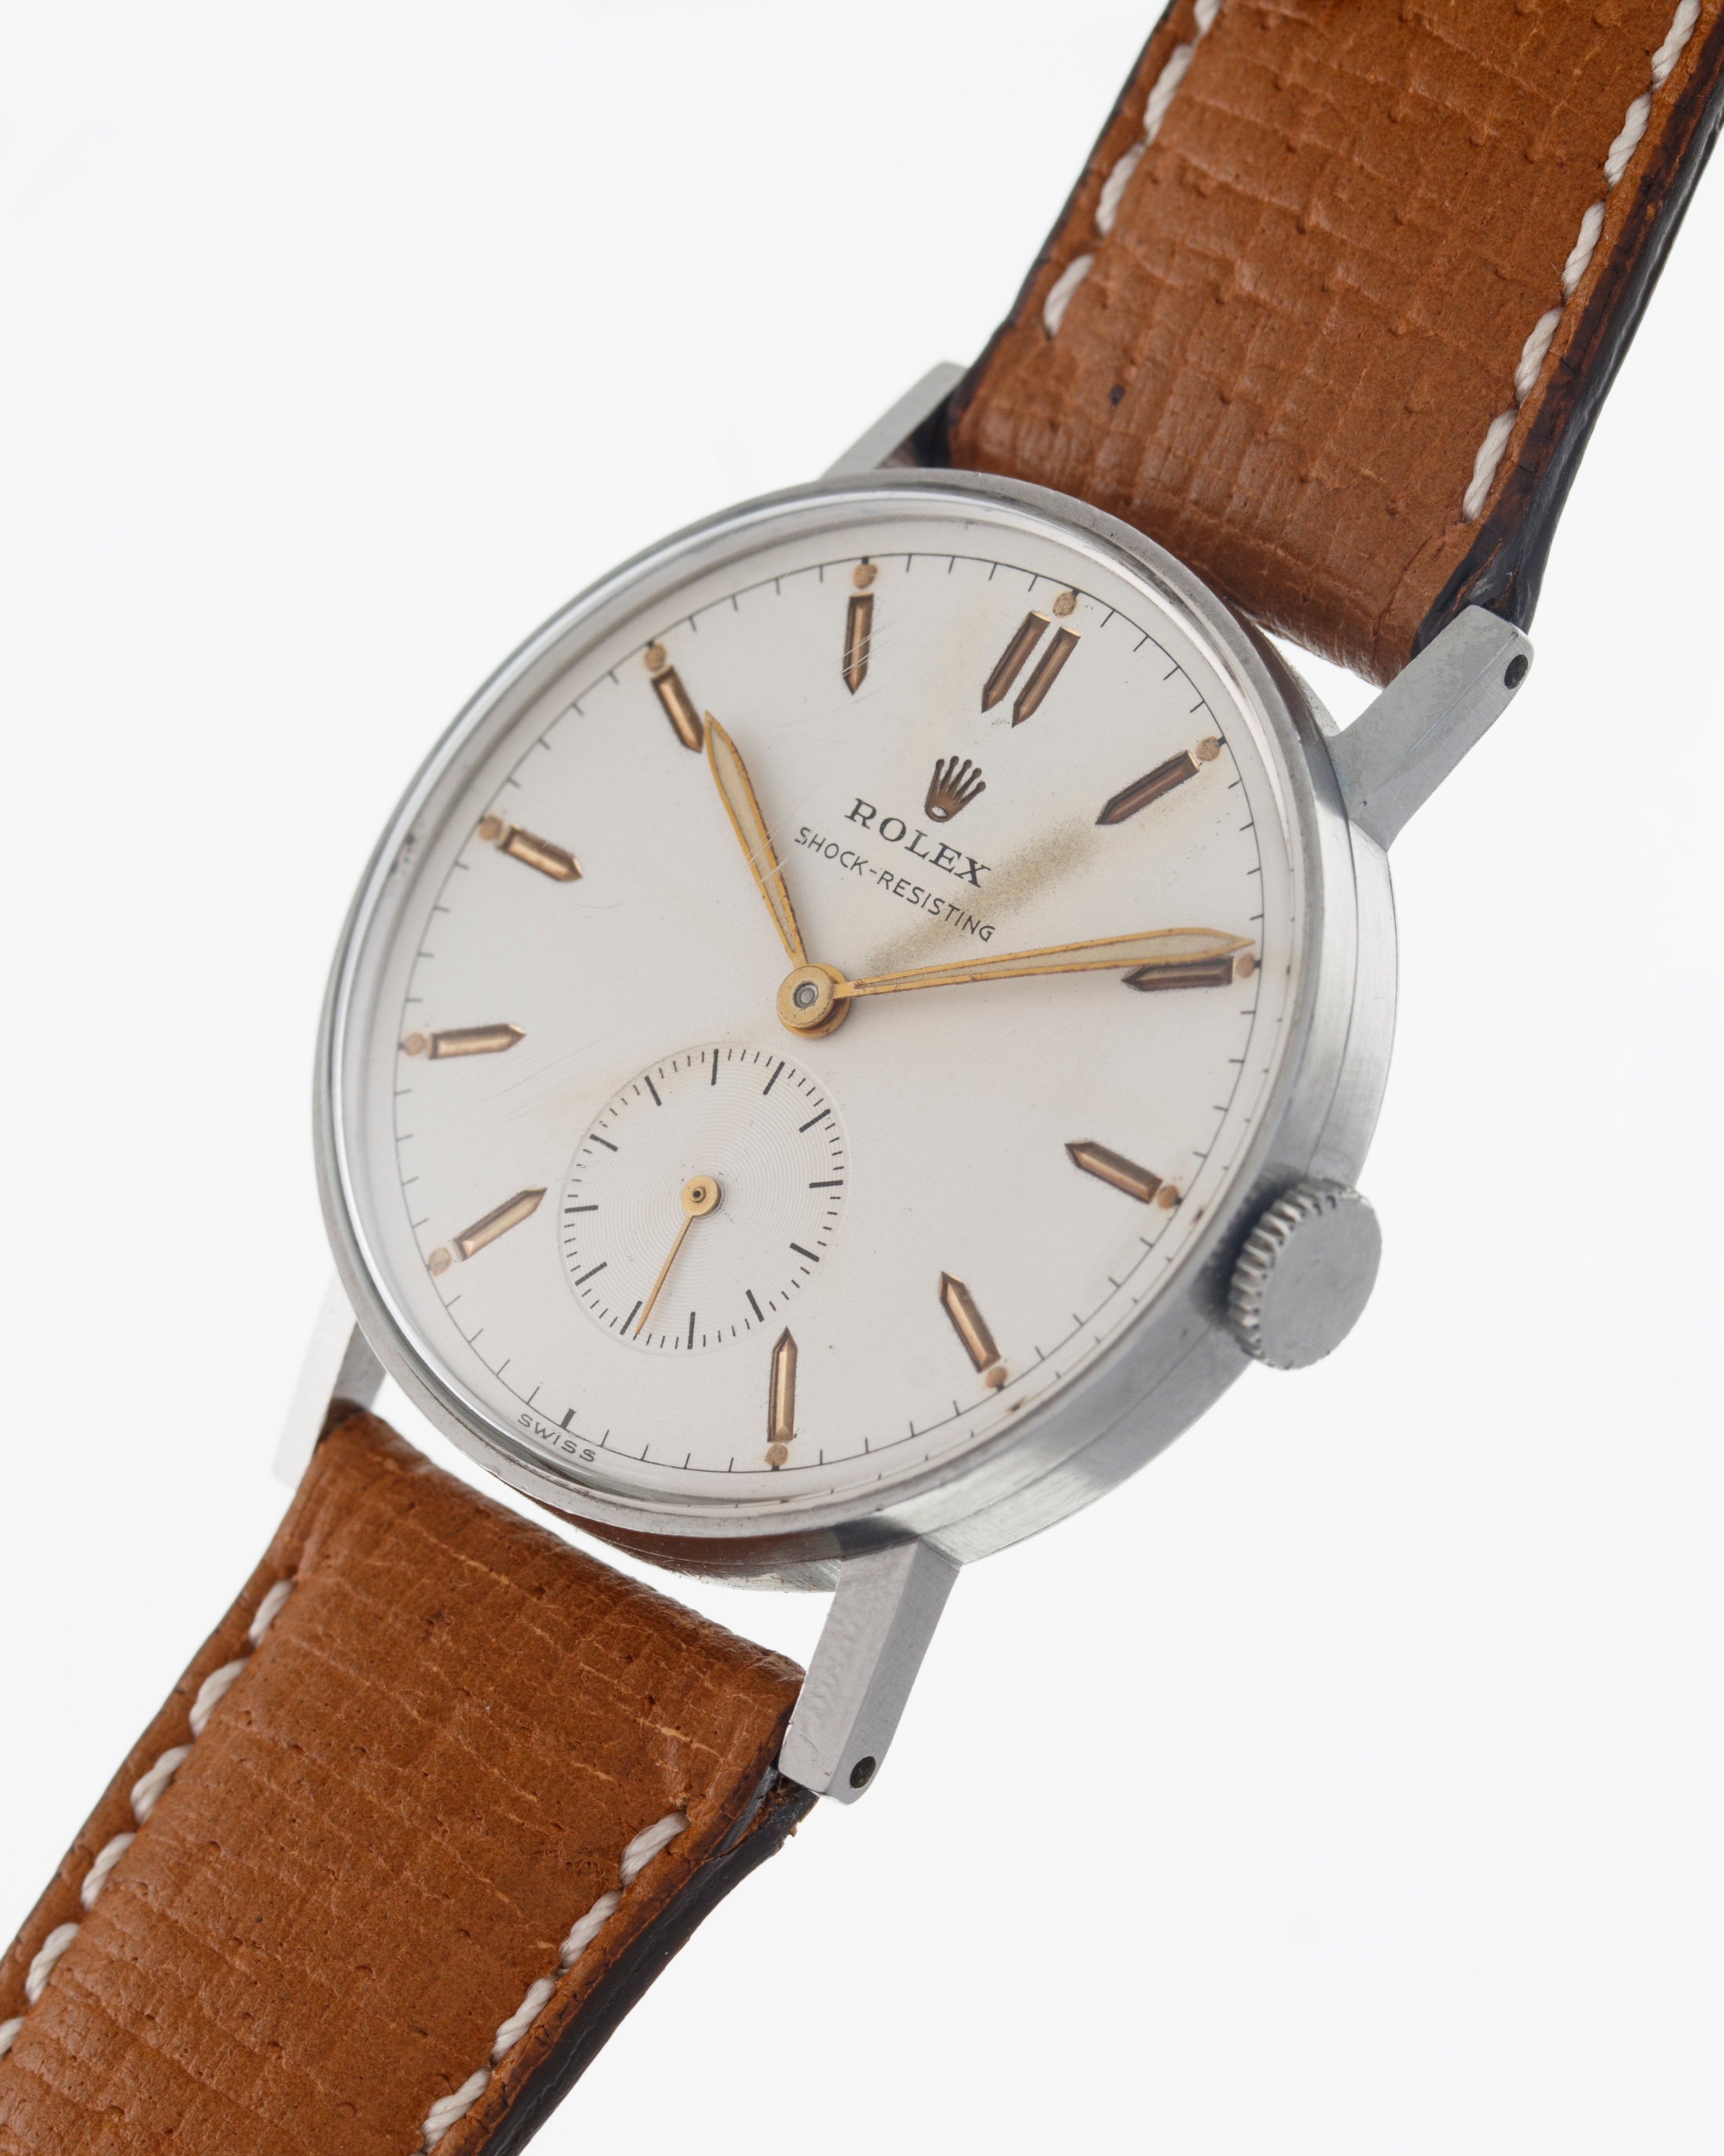 Rolex ref. 3265 A "Moneta" in stailess steel with white dial